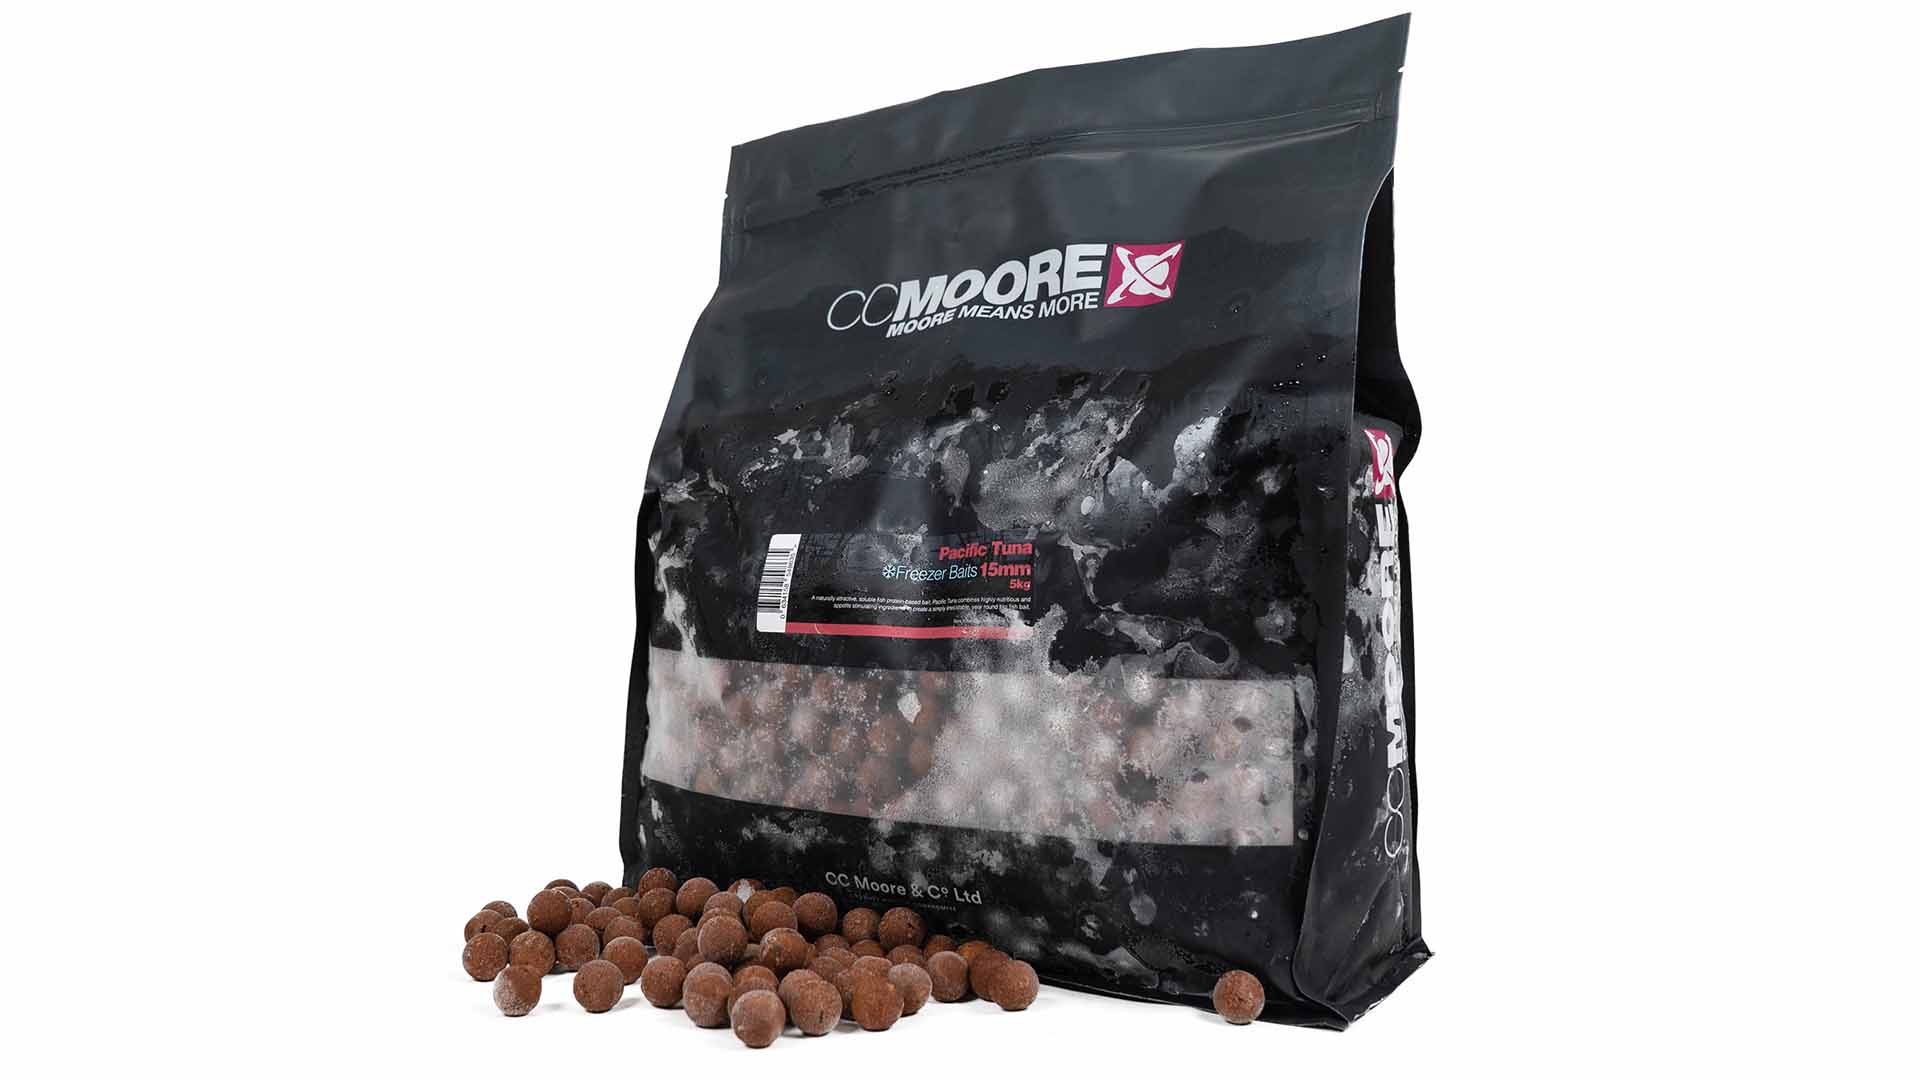 CC MOORE CC MOORE Pacific Tuna Freezer Baits CC MOORE Pacific Tuna Freezer Baits 15mm 5kg - Parkfield Angling Centre